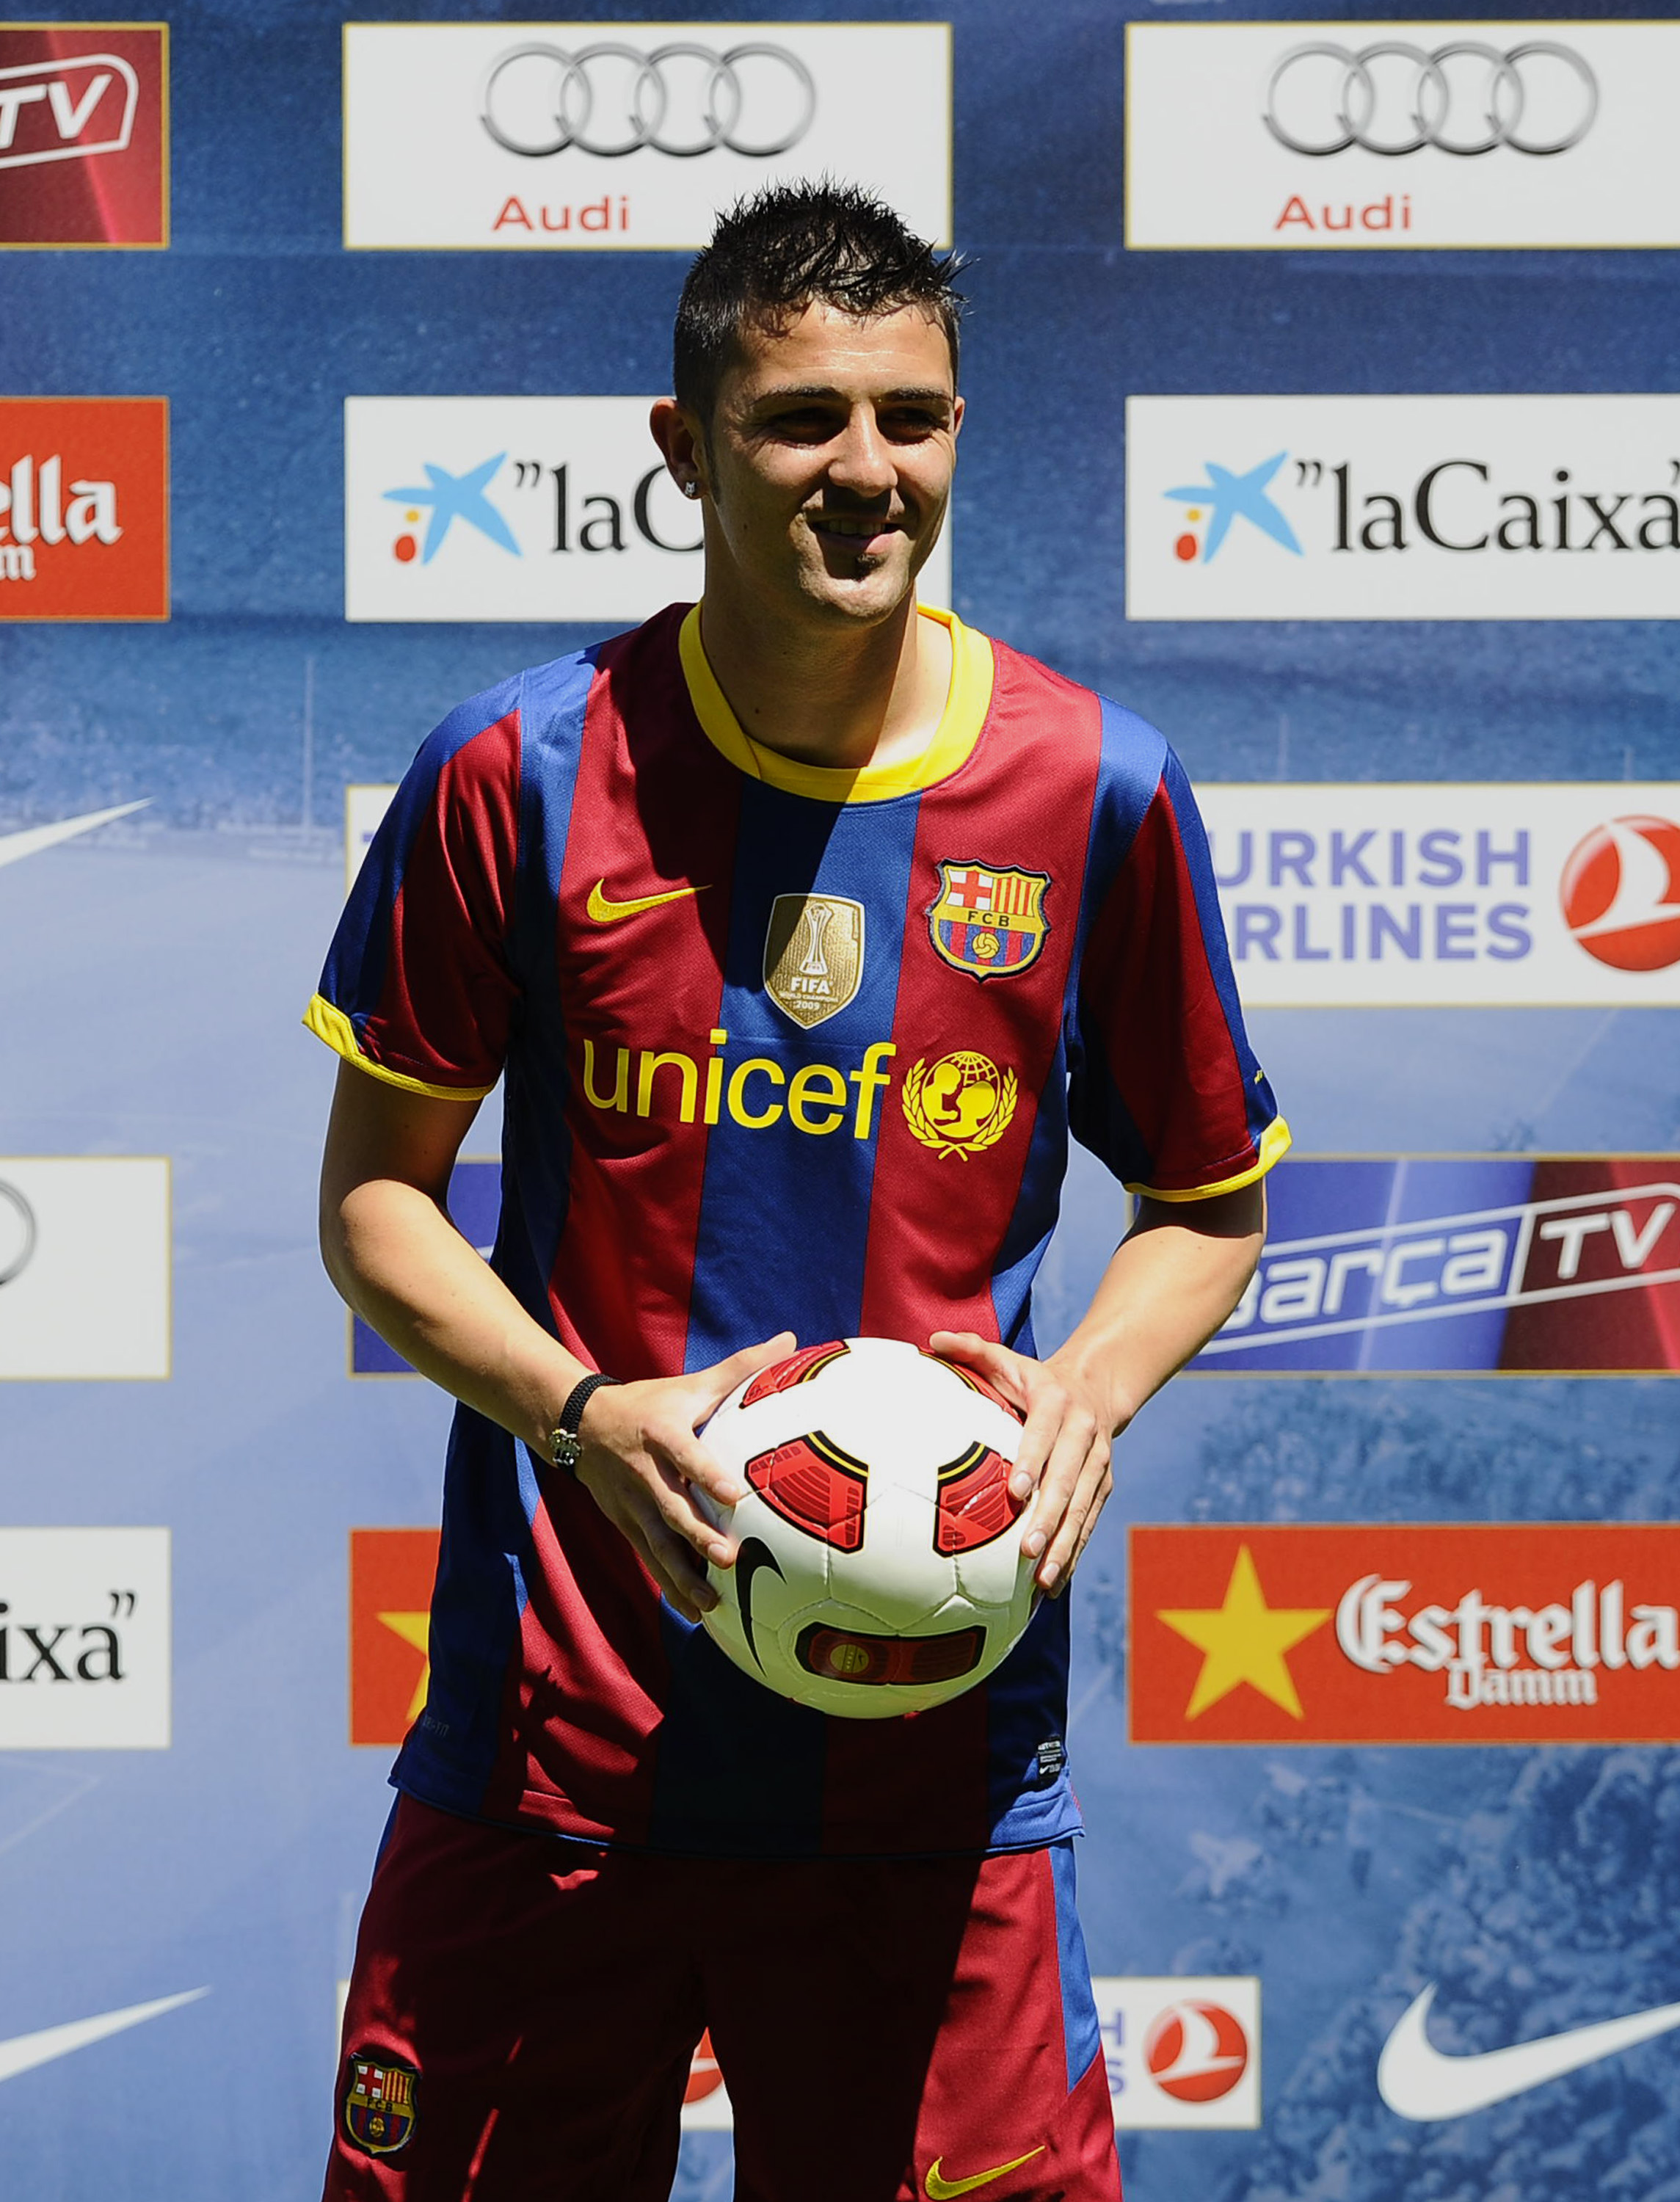 BARCELONA, SPAIN - MAY 21:  Barcelona's new signing David Villa holds the ball as he poses for the cameras during his presentation at the Camp Nou stadium on May 21, 2010 in Barcelona, Spain.  (Photo by Siu Pong Wu Lau/Getty Images)